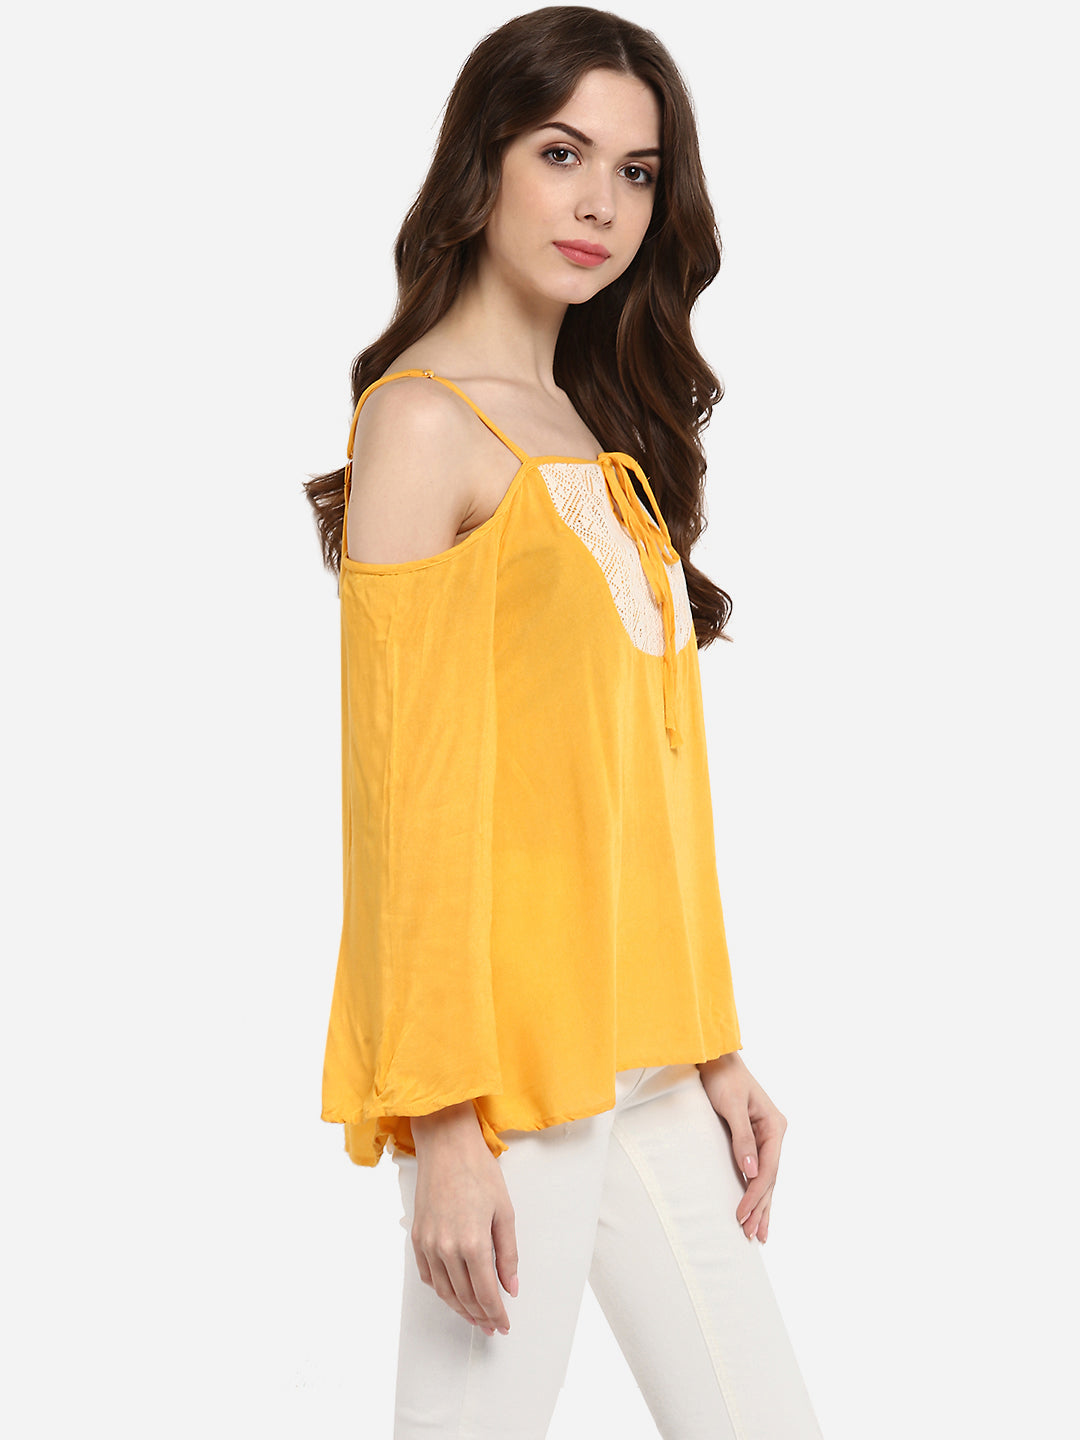 Women's Mustard Yellow Rayon Cold Shoulder Top